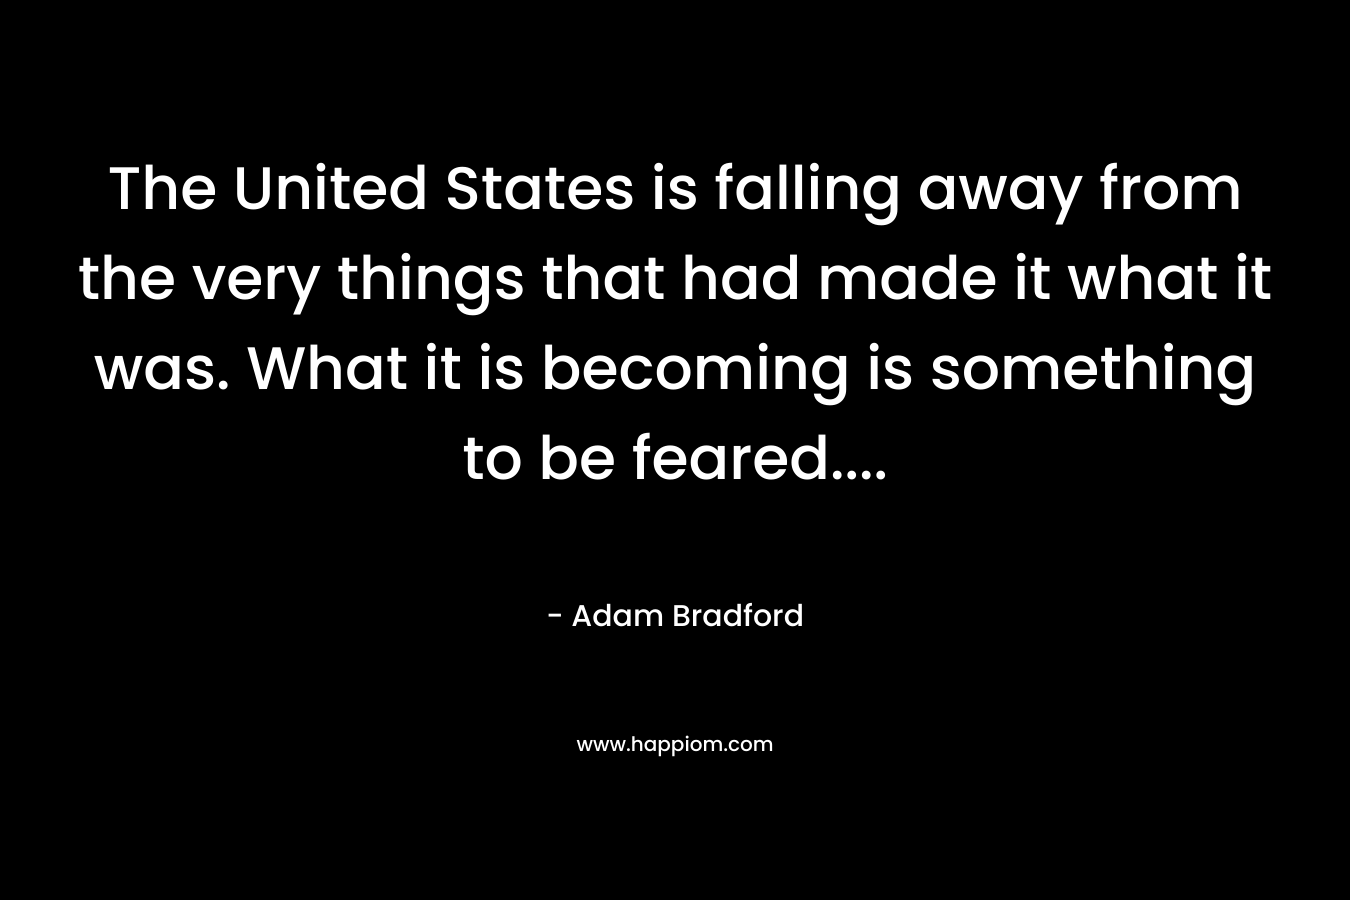 The United States is falling away from the very things that had made it what it was. What it is becoming is something to be feared....